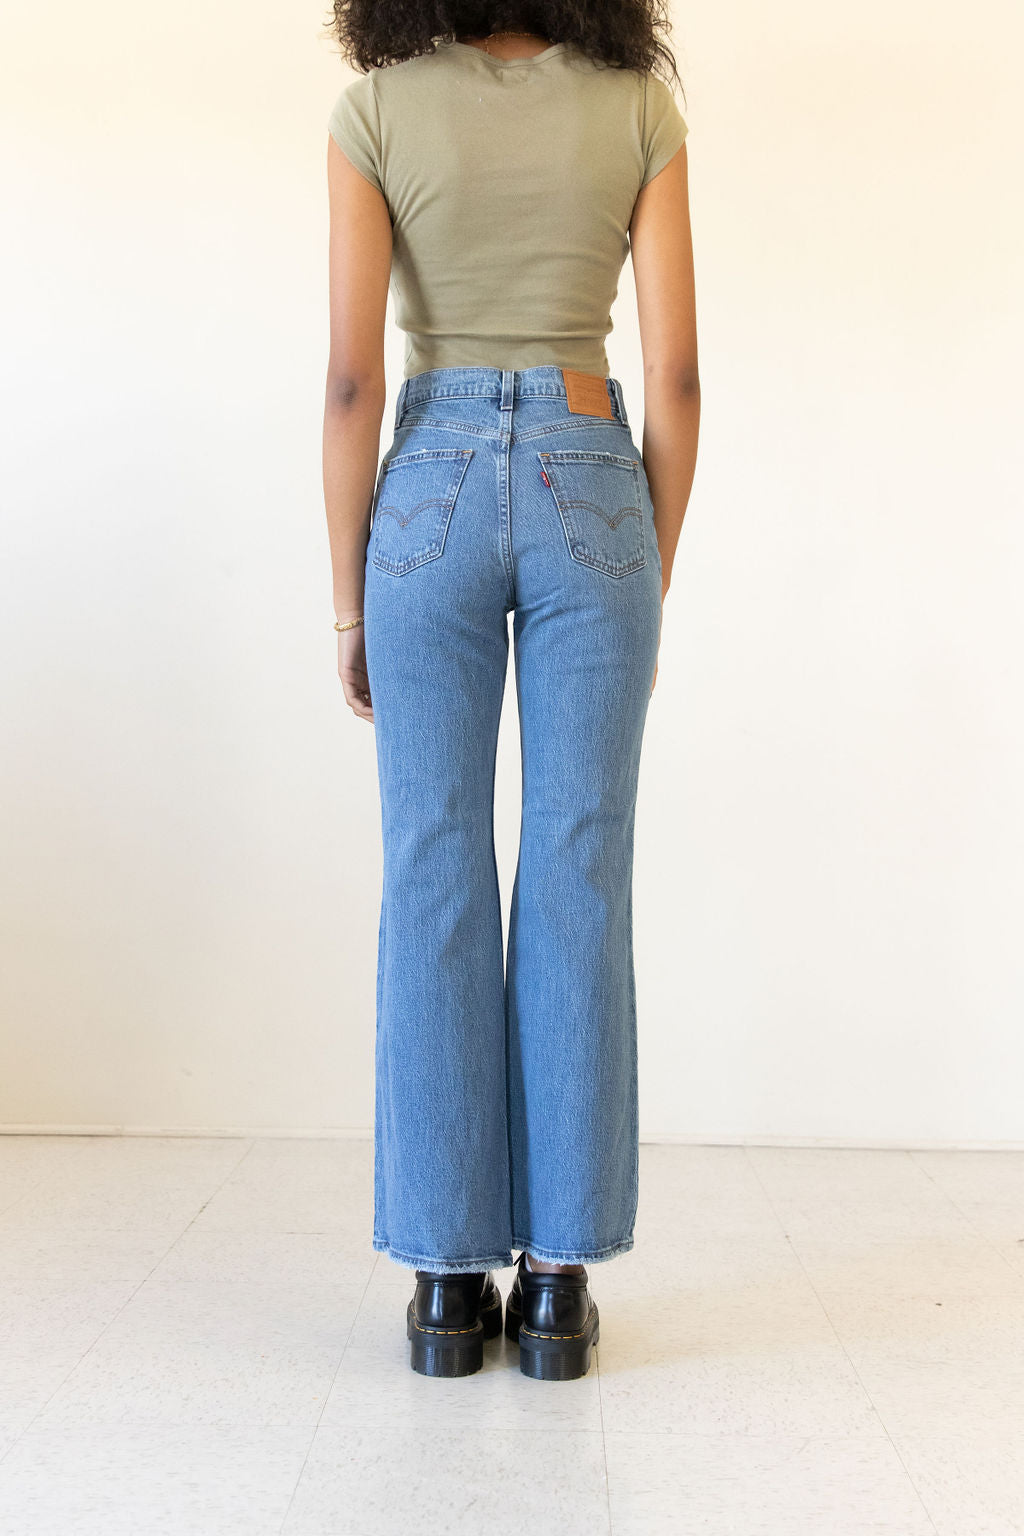 70s High Flare Long Bottom Jeans by Levi's